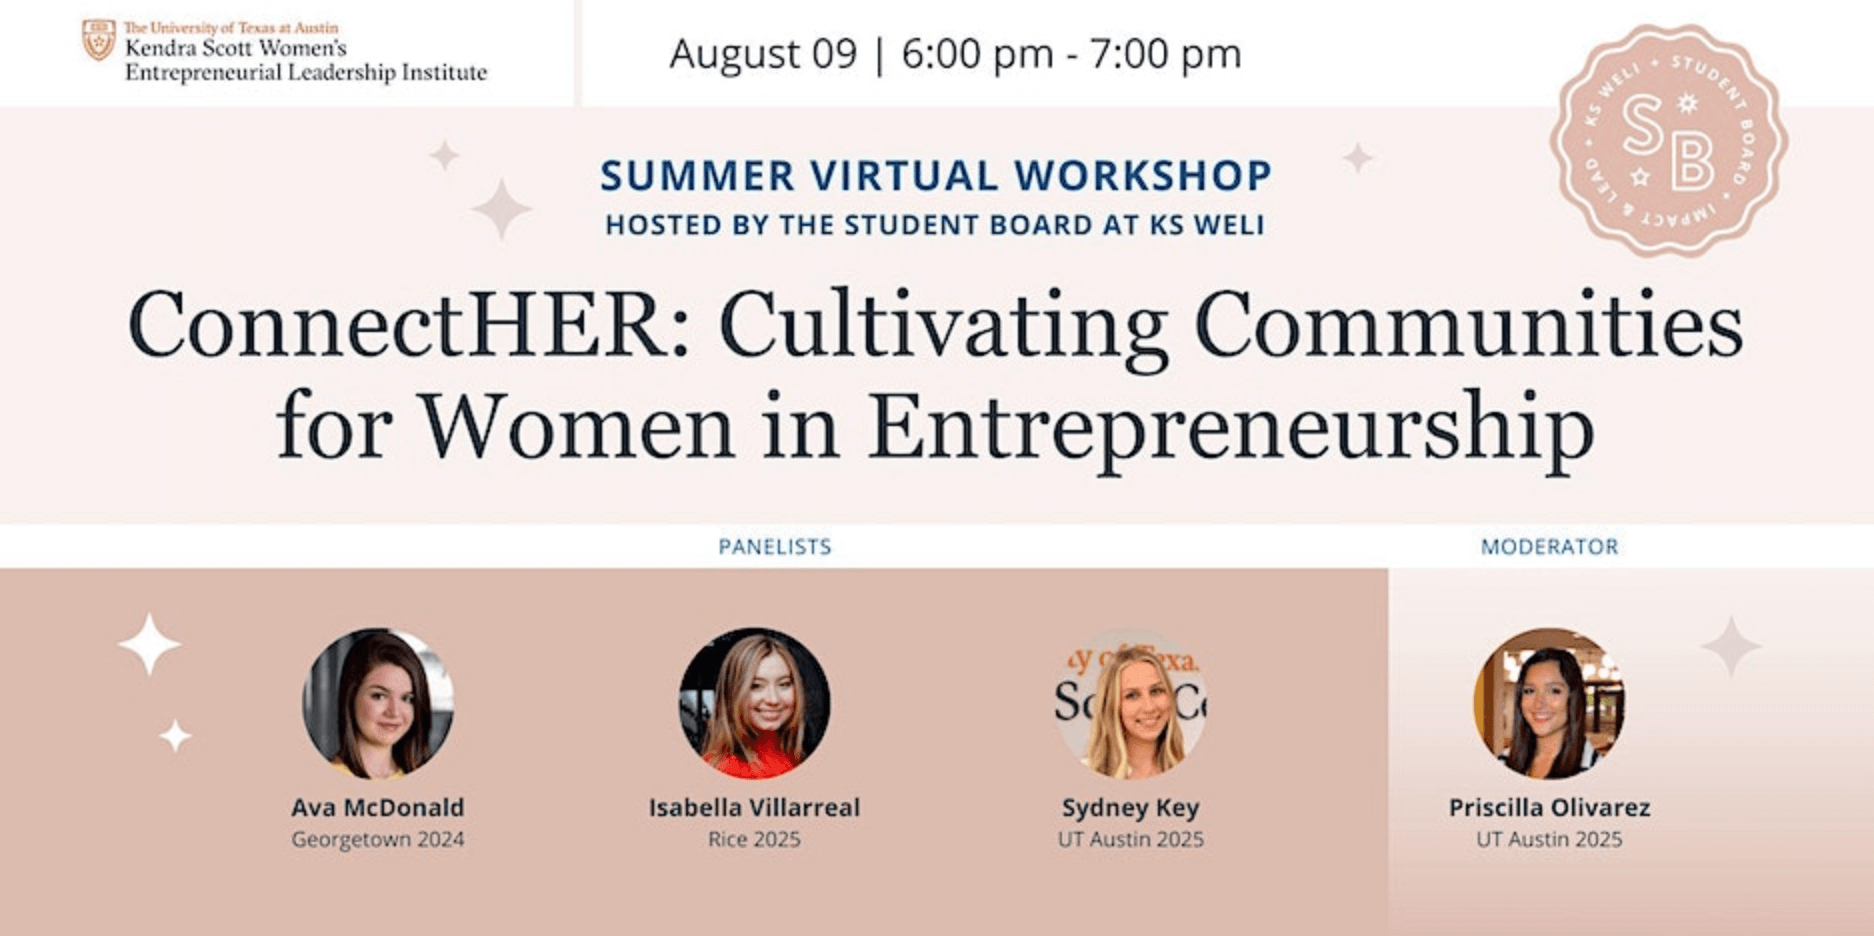 ConnectHER: Cultivating Communities for Women in Entrepreneurship